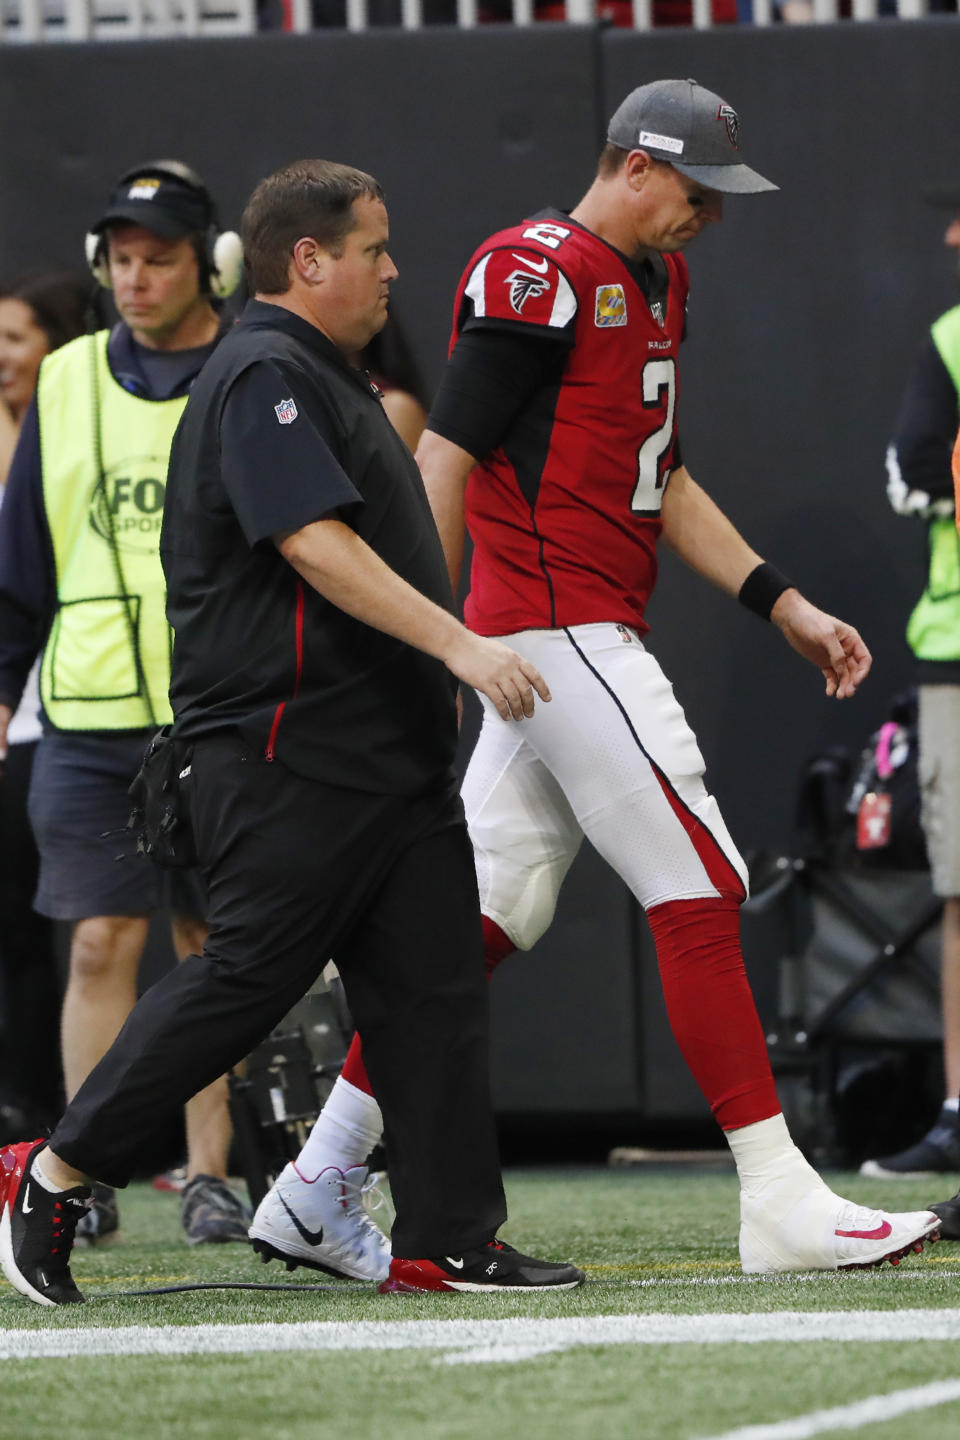 Atlanta Falcons quarterback Matt Ryan (2) leaves the field after injury against the Los Angeles Rams during the second half of an NFL football game, Sunday, Oct. 20, 2019, in Atlanta. (AP Photo/John Bazemore)